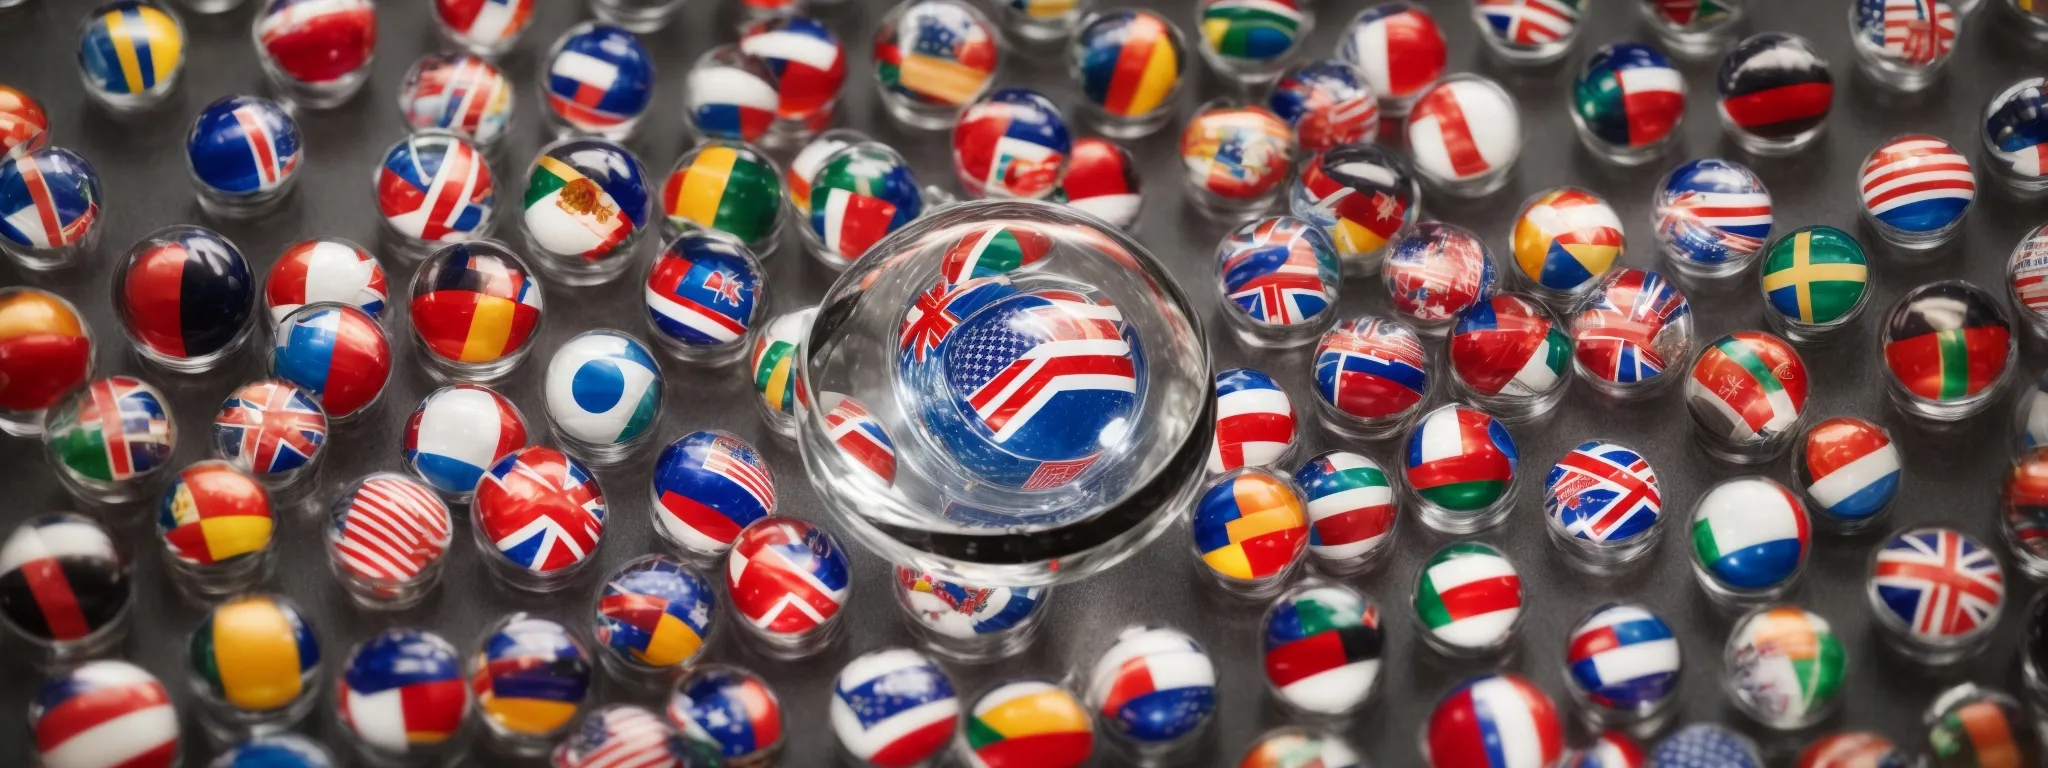 a globe surrounded by various flag icons, with a magnifying glass focusing on different regions.